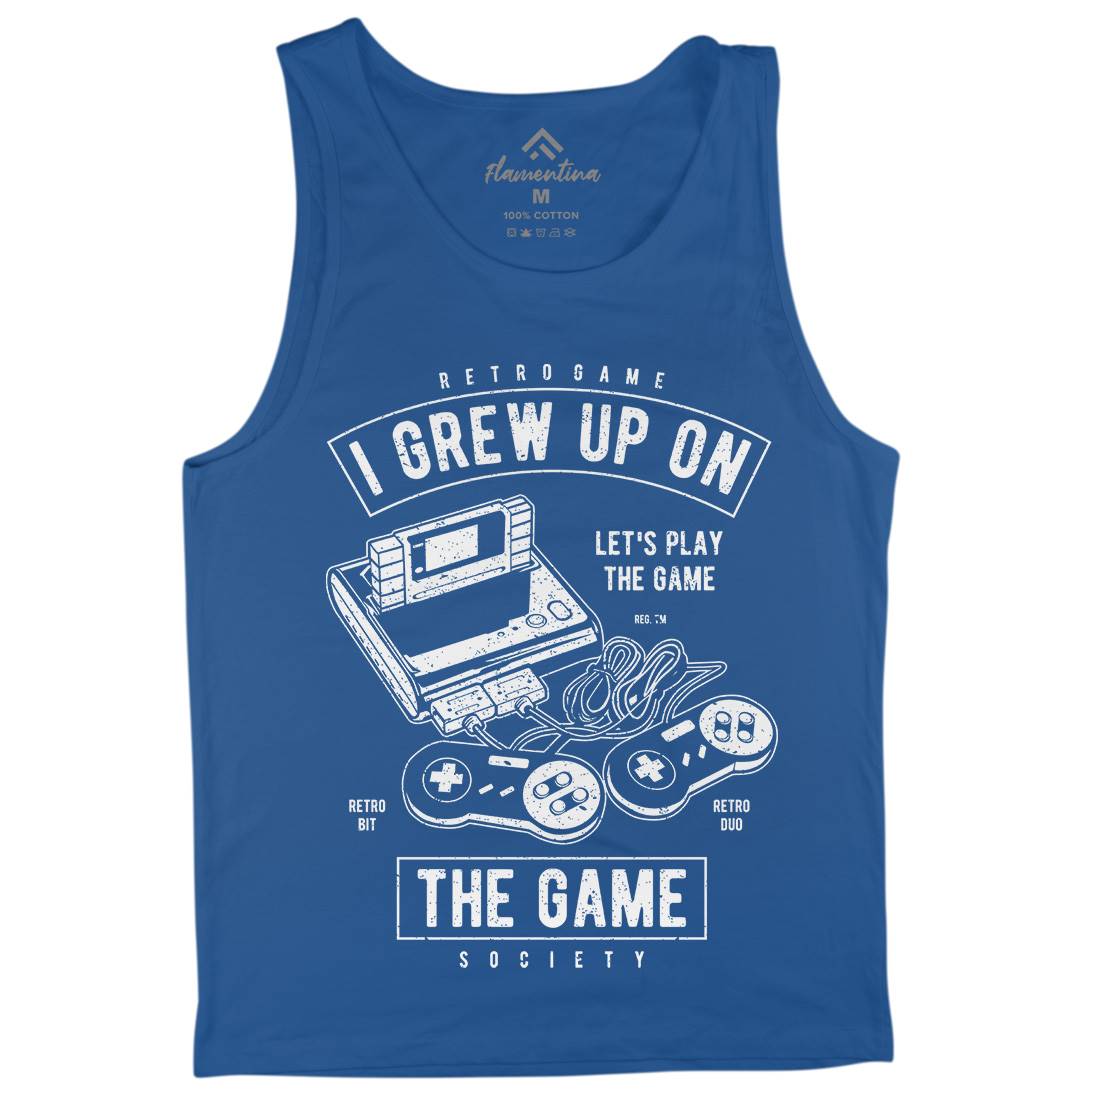 Grew Up On The Game Mens Tank Top Vest Geek A679